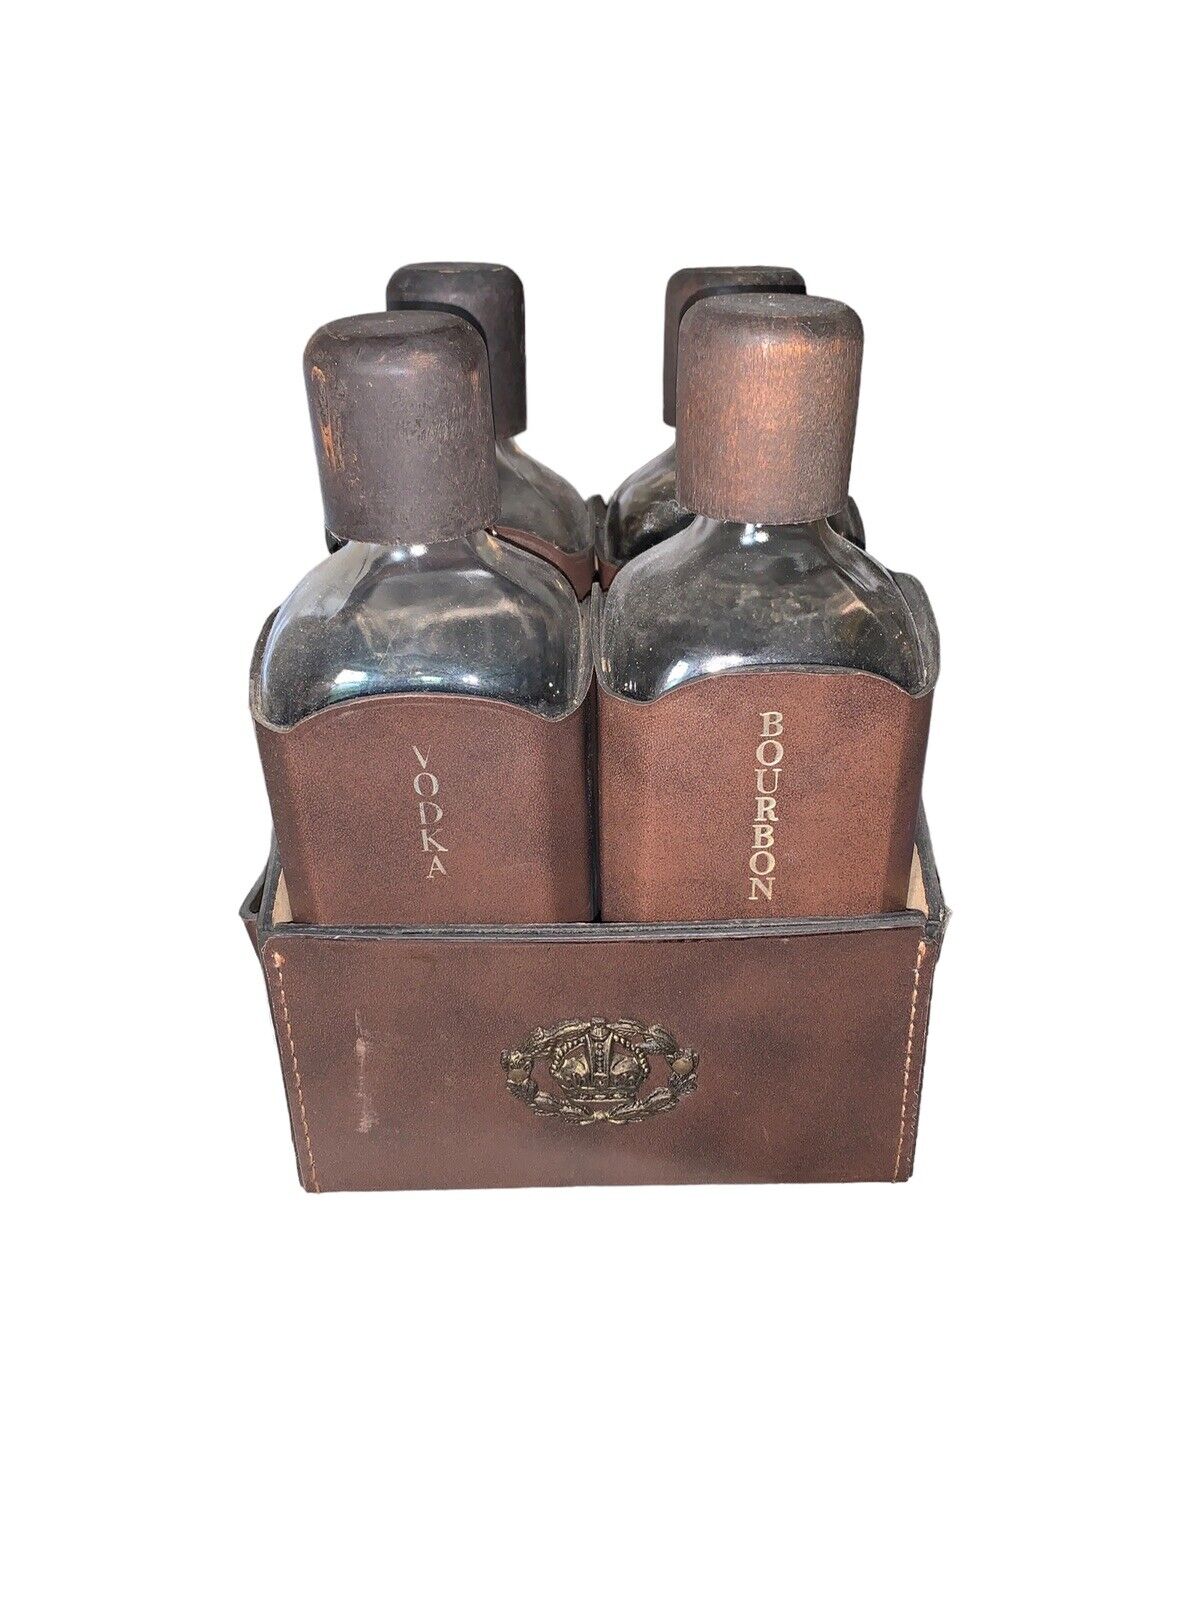 20th Century English Leather Wrapped Glass Liquor Bottles & Caddie By Albro,